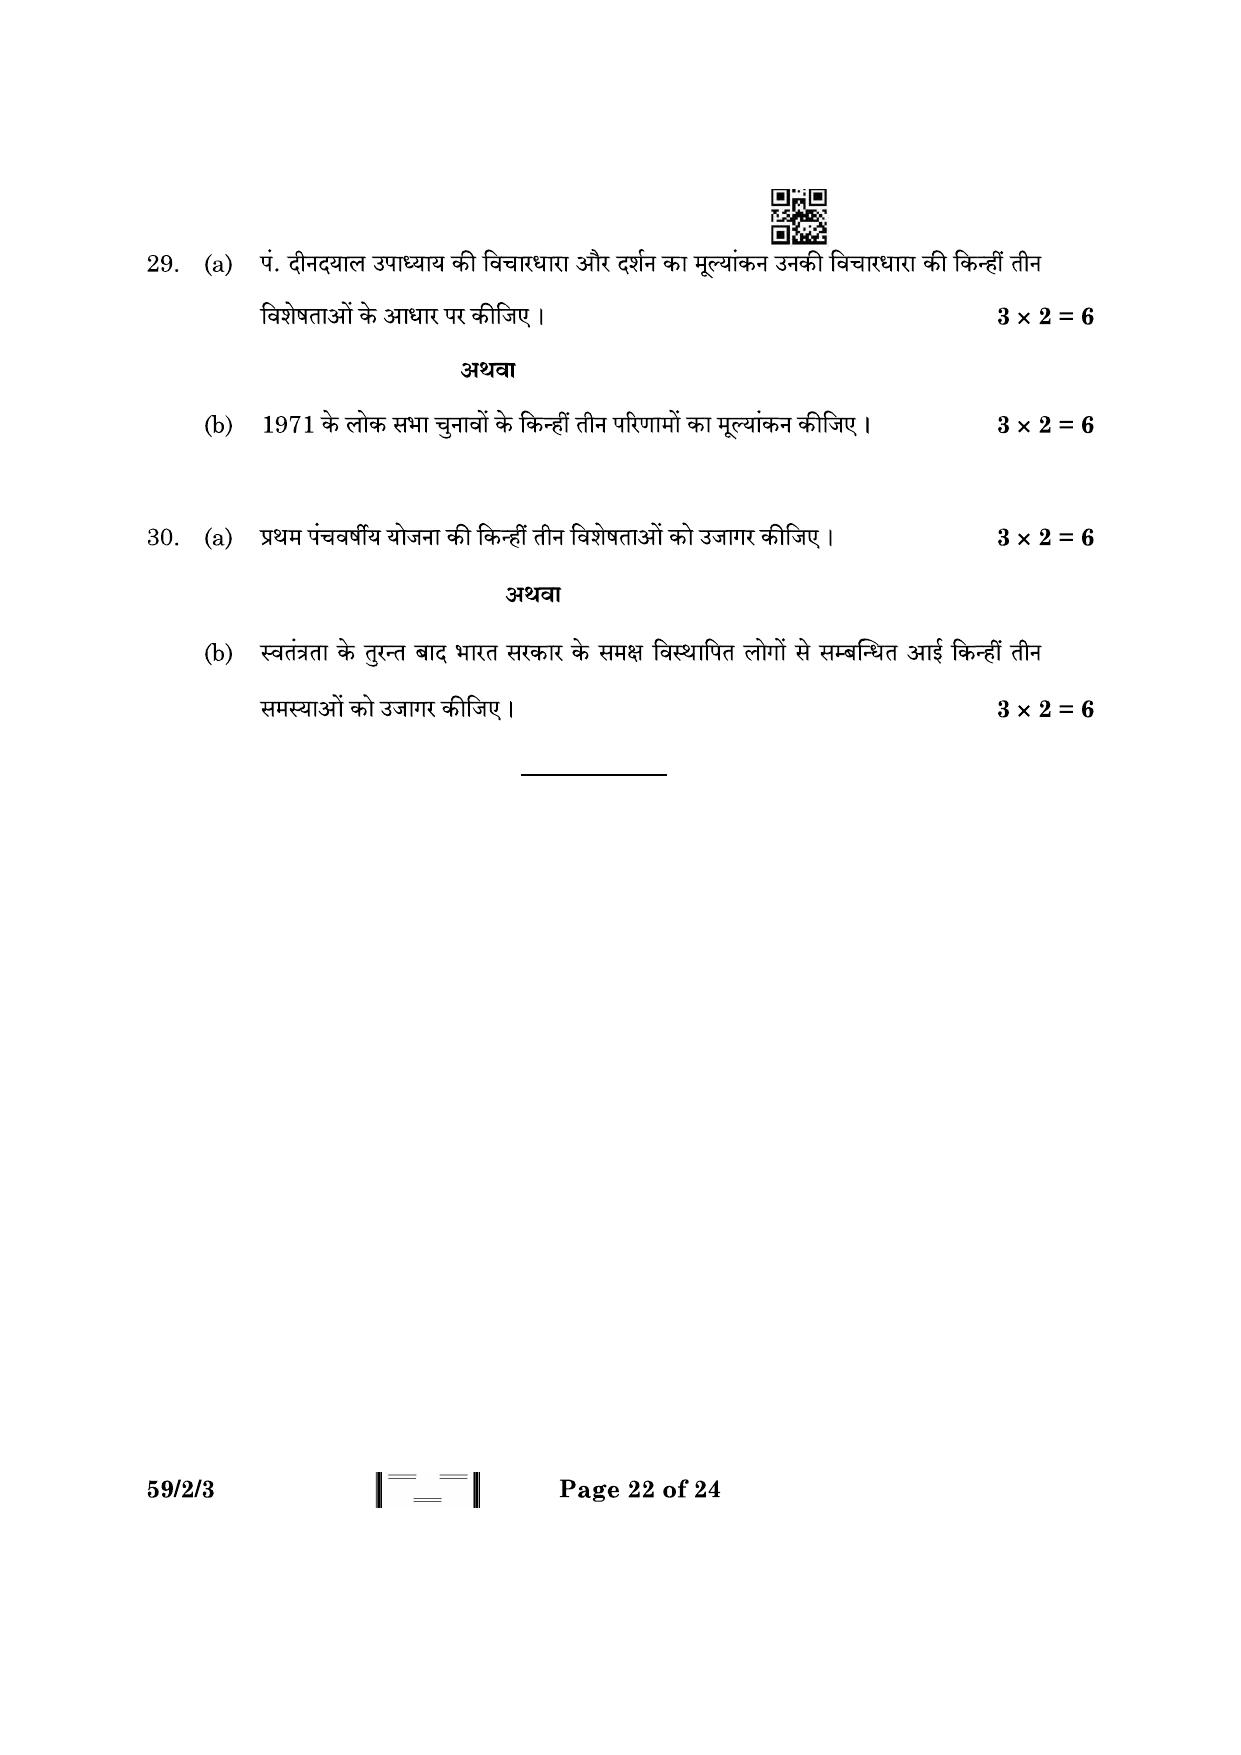 CBSE Class 12 59-2-3 Political Science 2023 Question Paper - Page 22